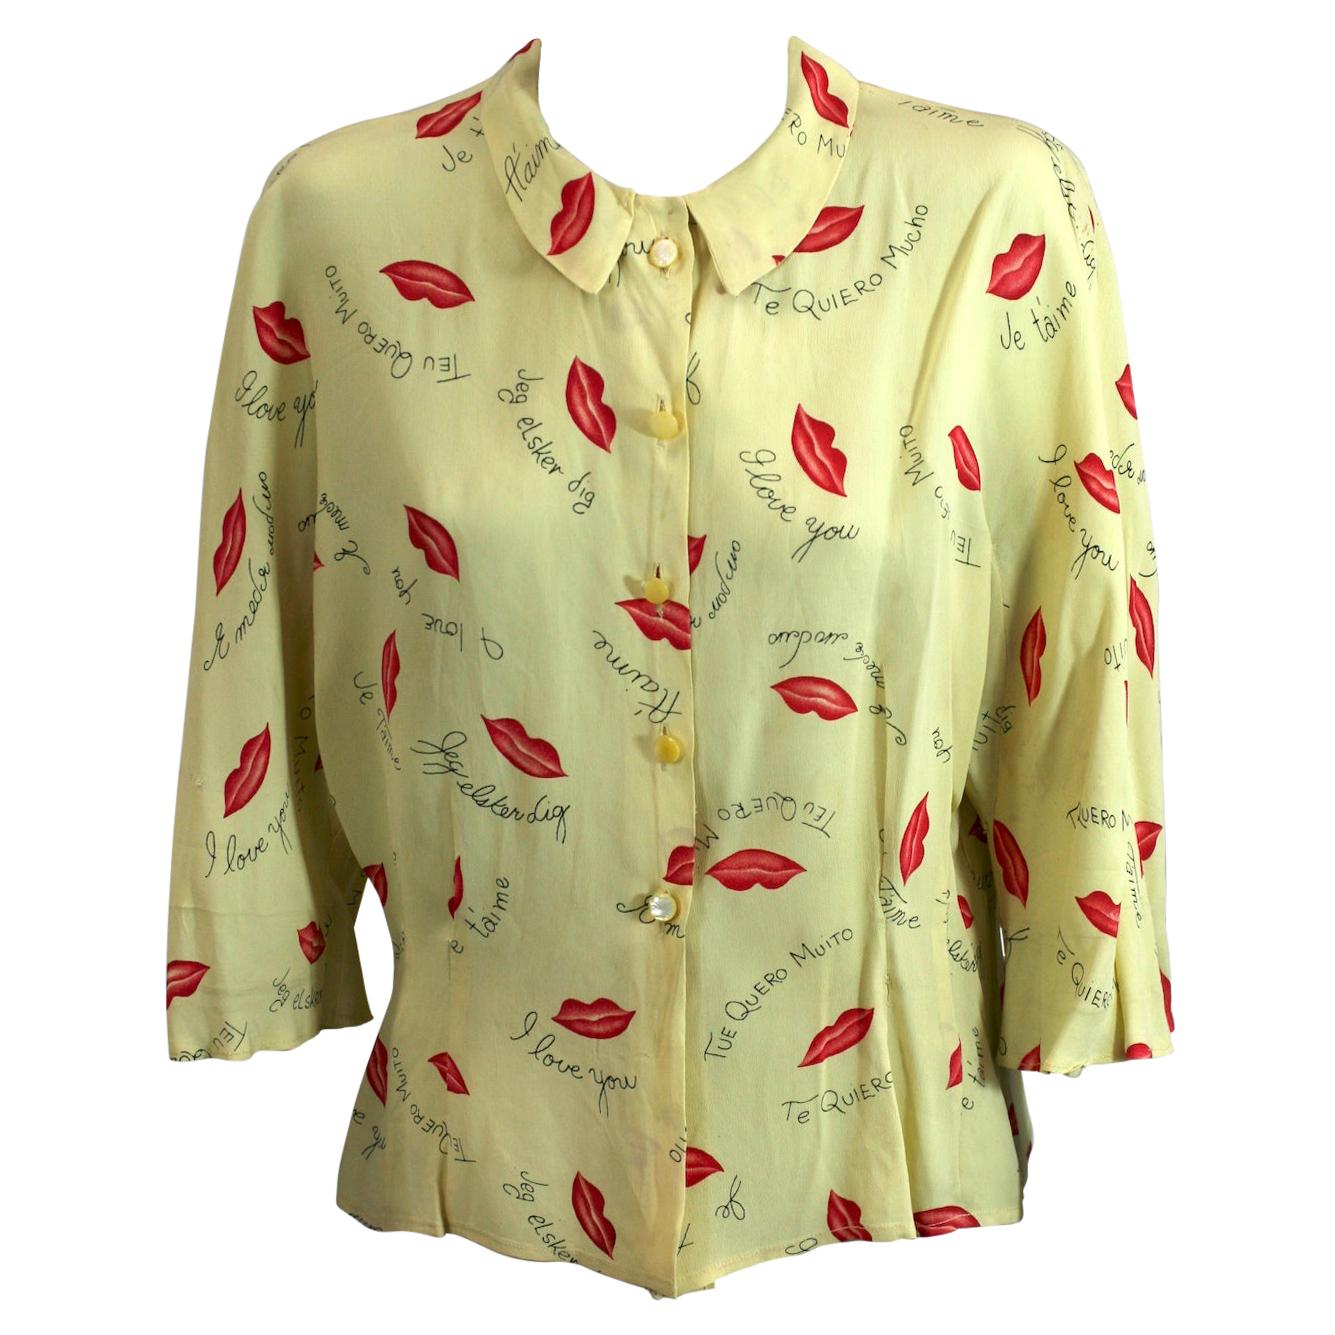 Charming Figural Lips And Love Sayings Printed Blouse For Sale